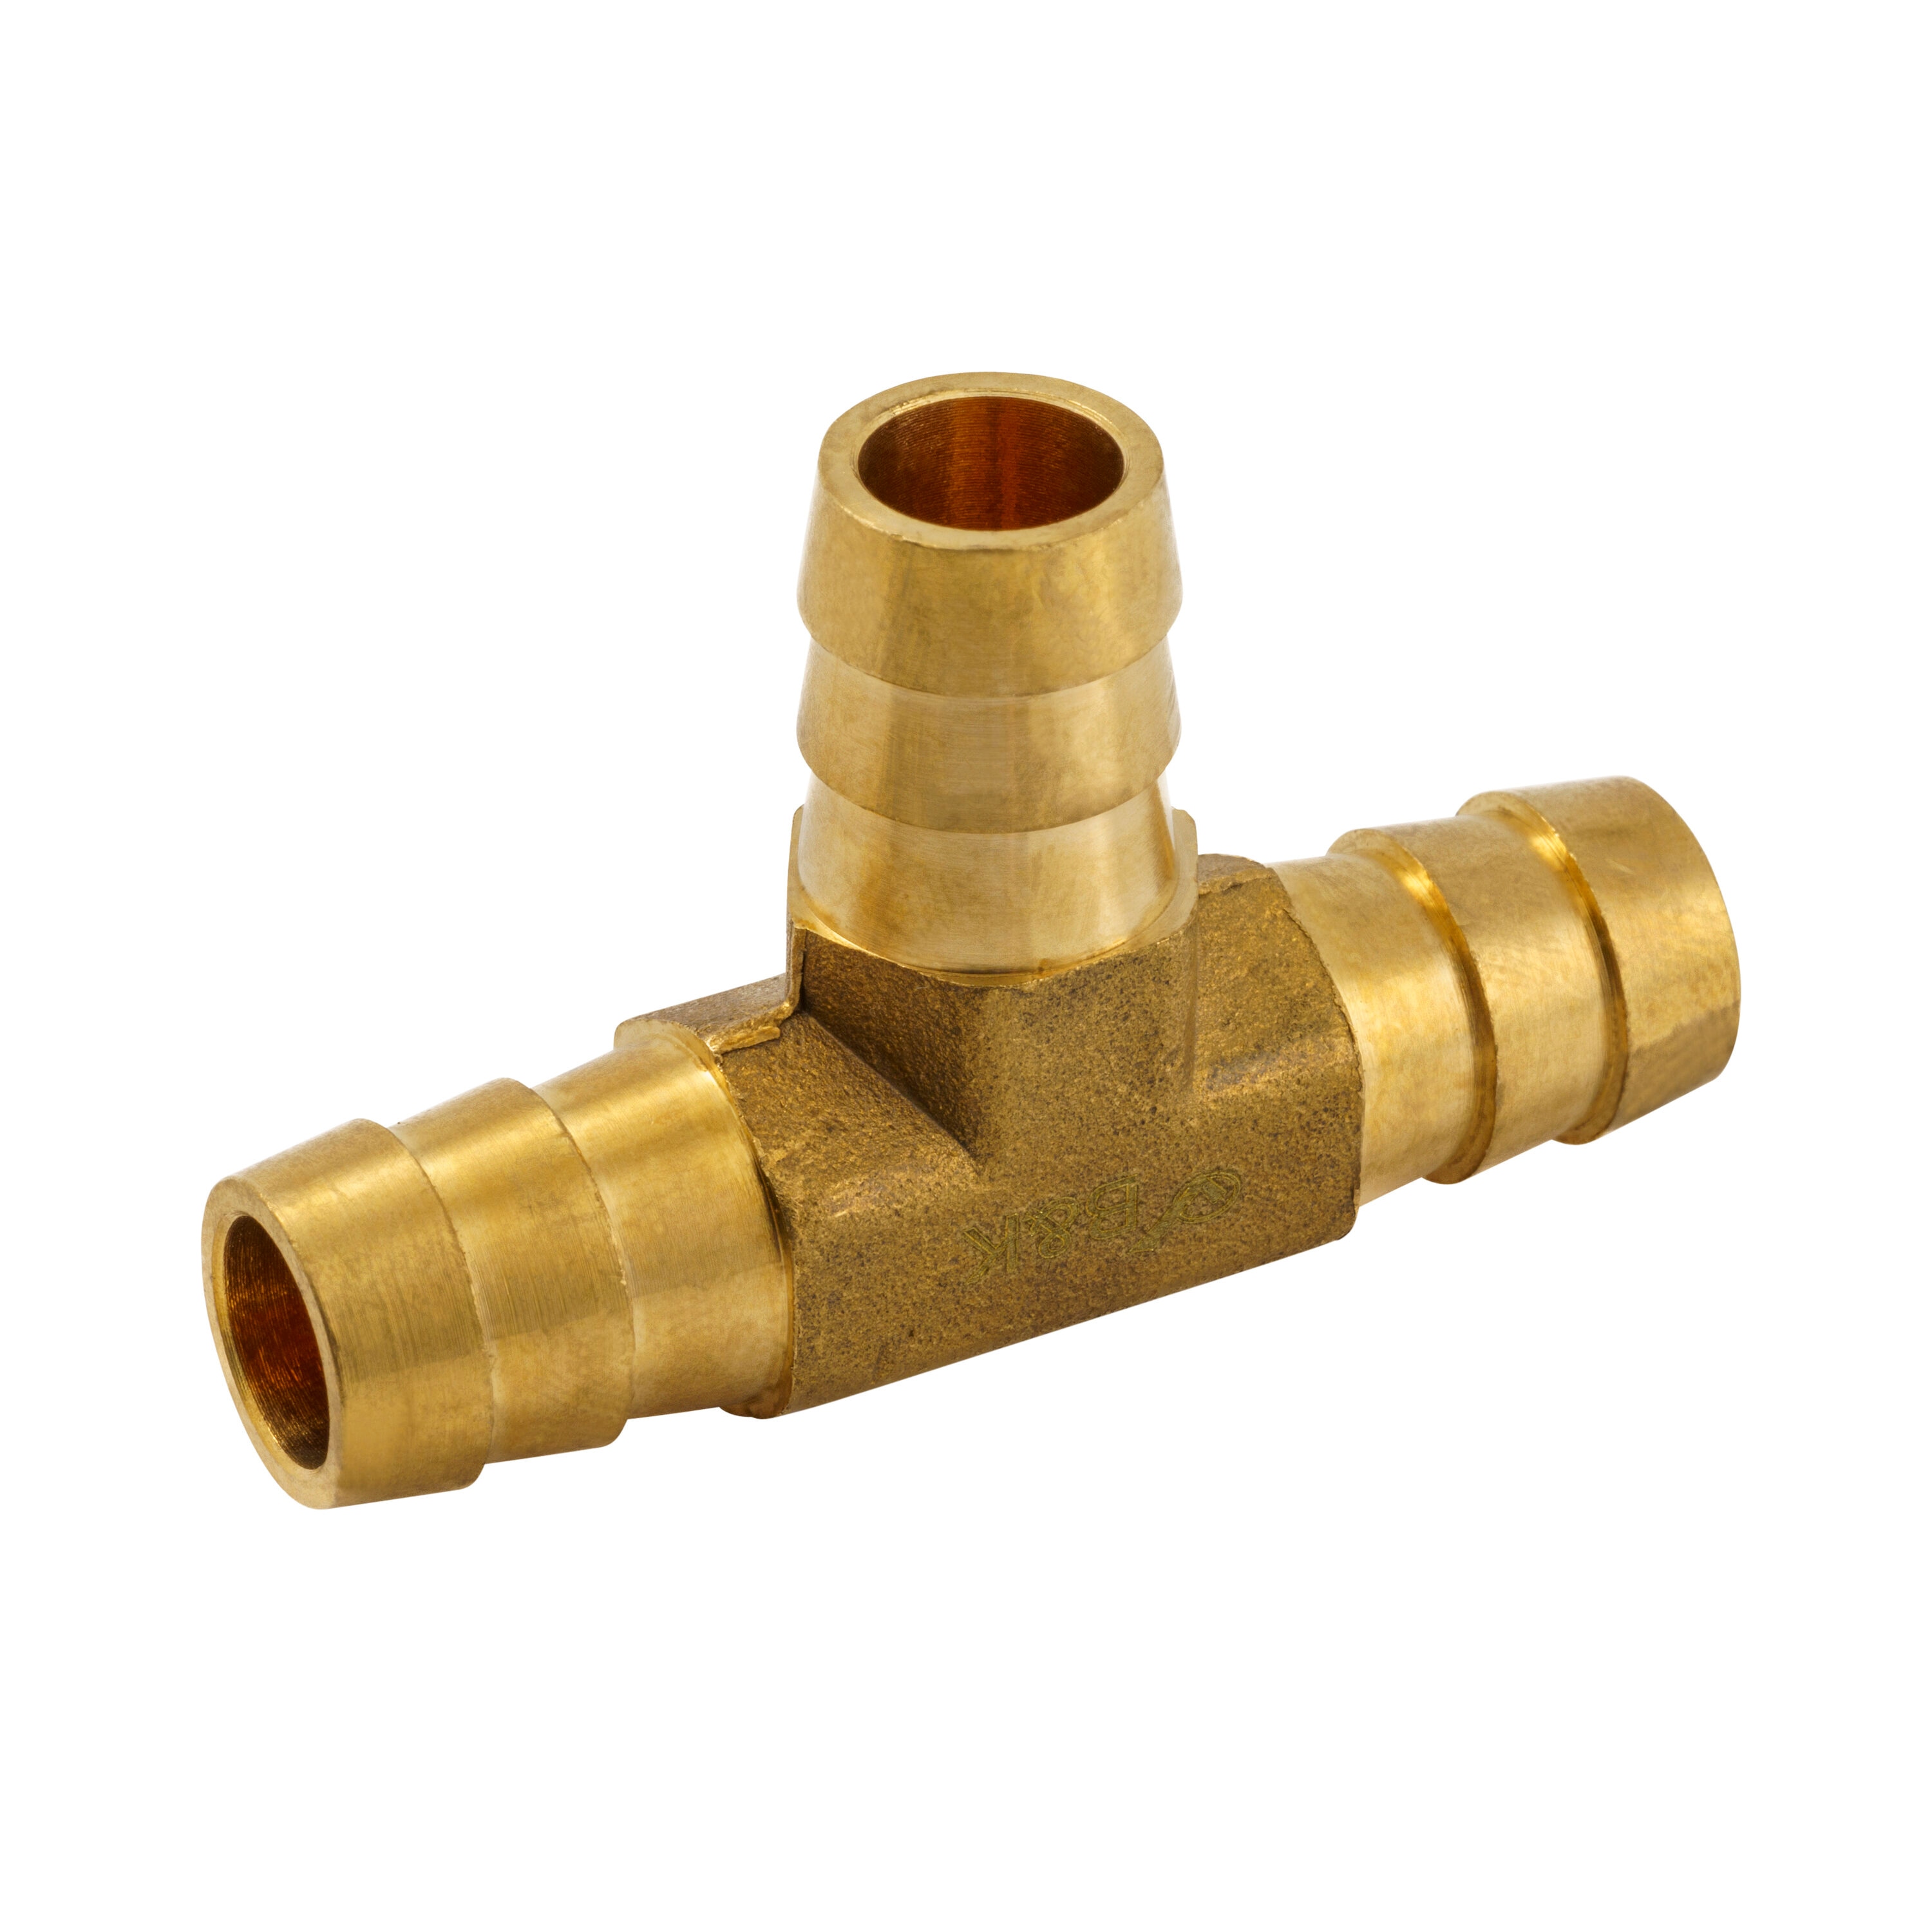 Pysrych Brass Hose Barb Fitting Reducing Tee 1/2 Barbed x 1/4